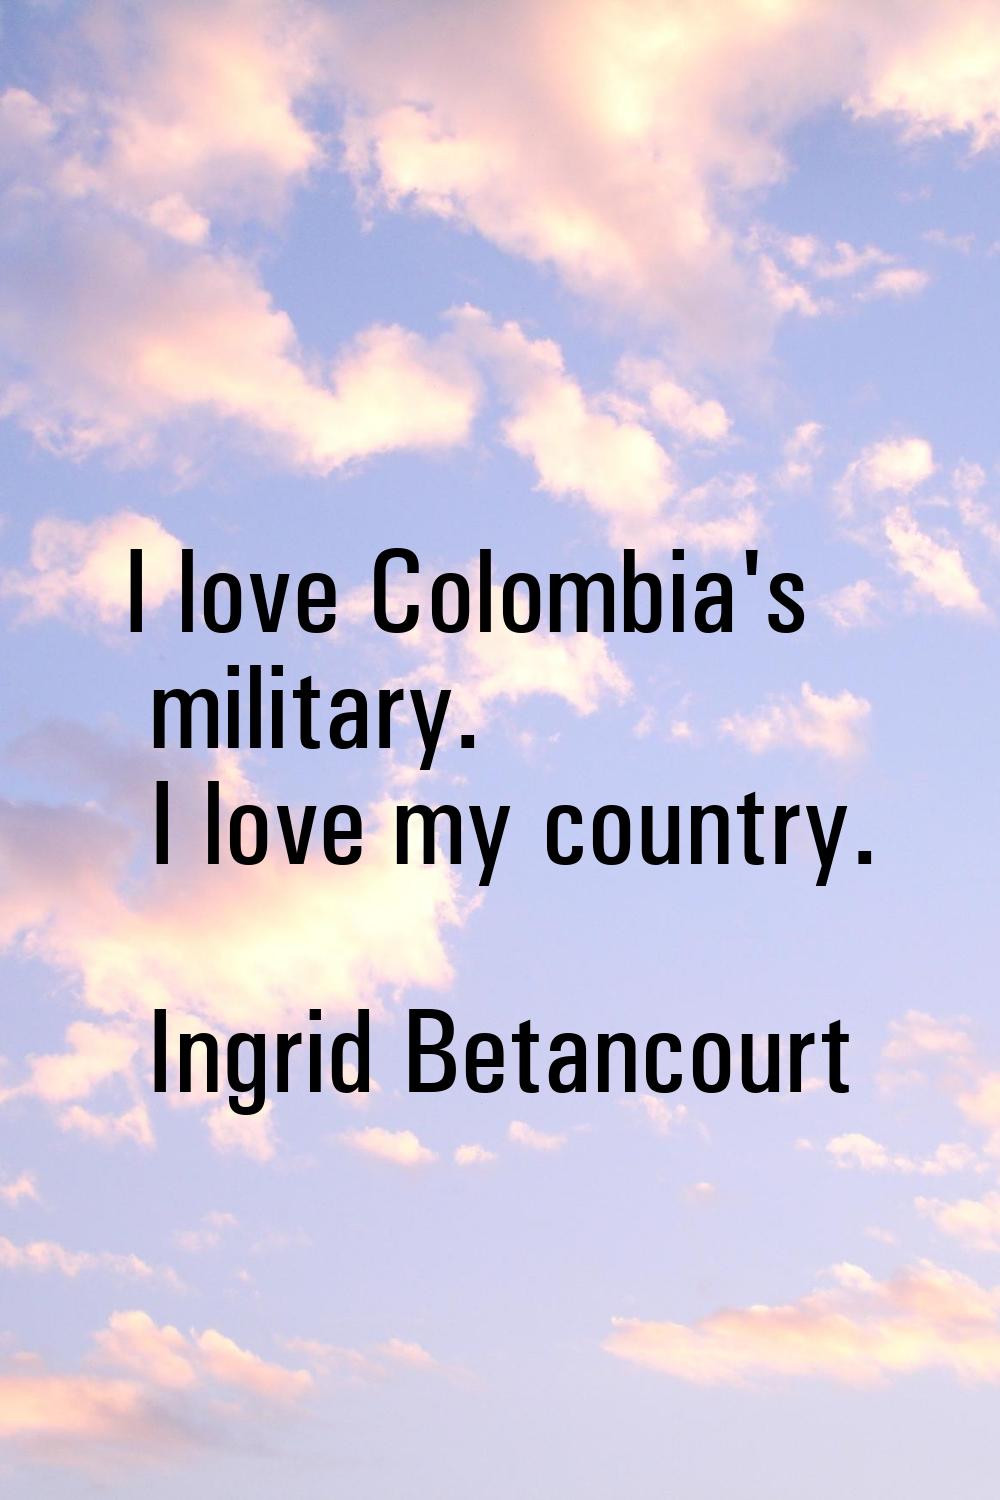 I love Colombia's military. I love my country.